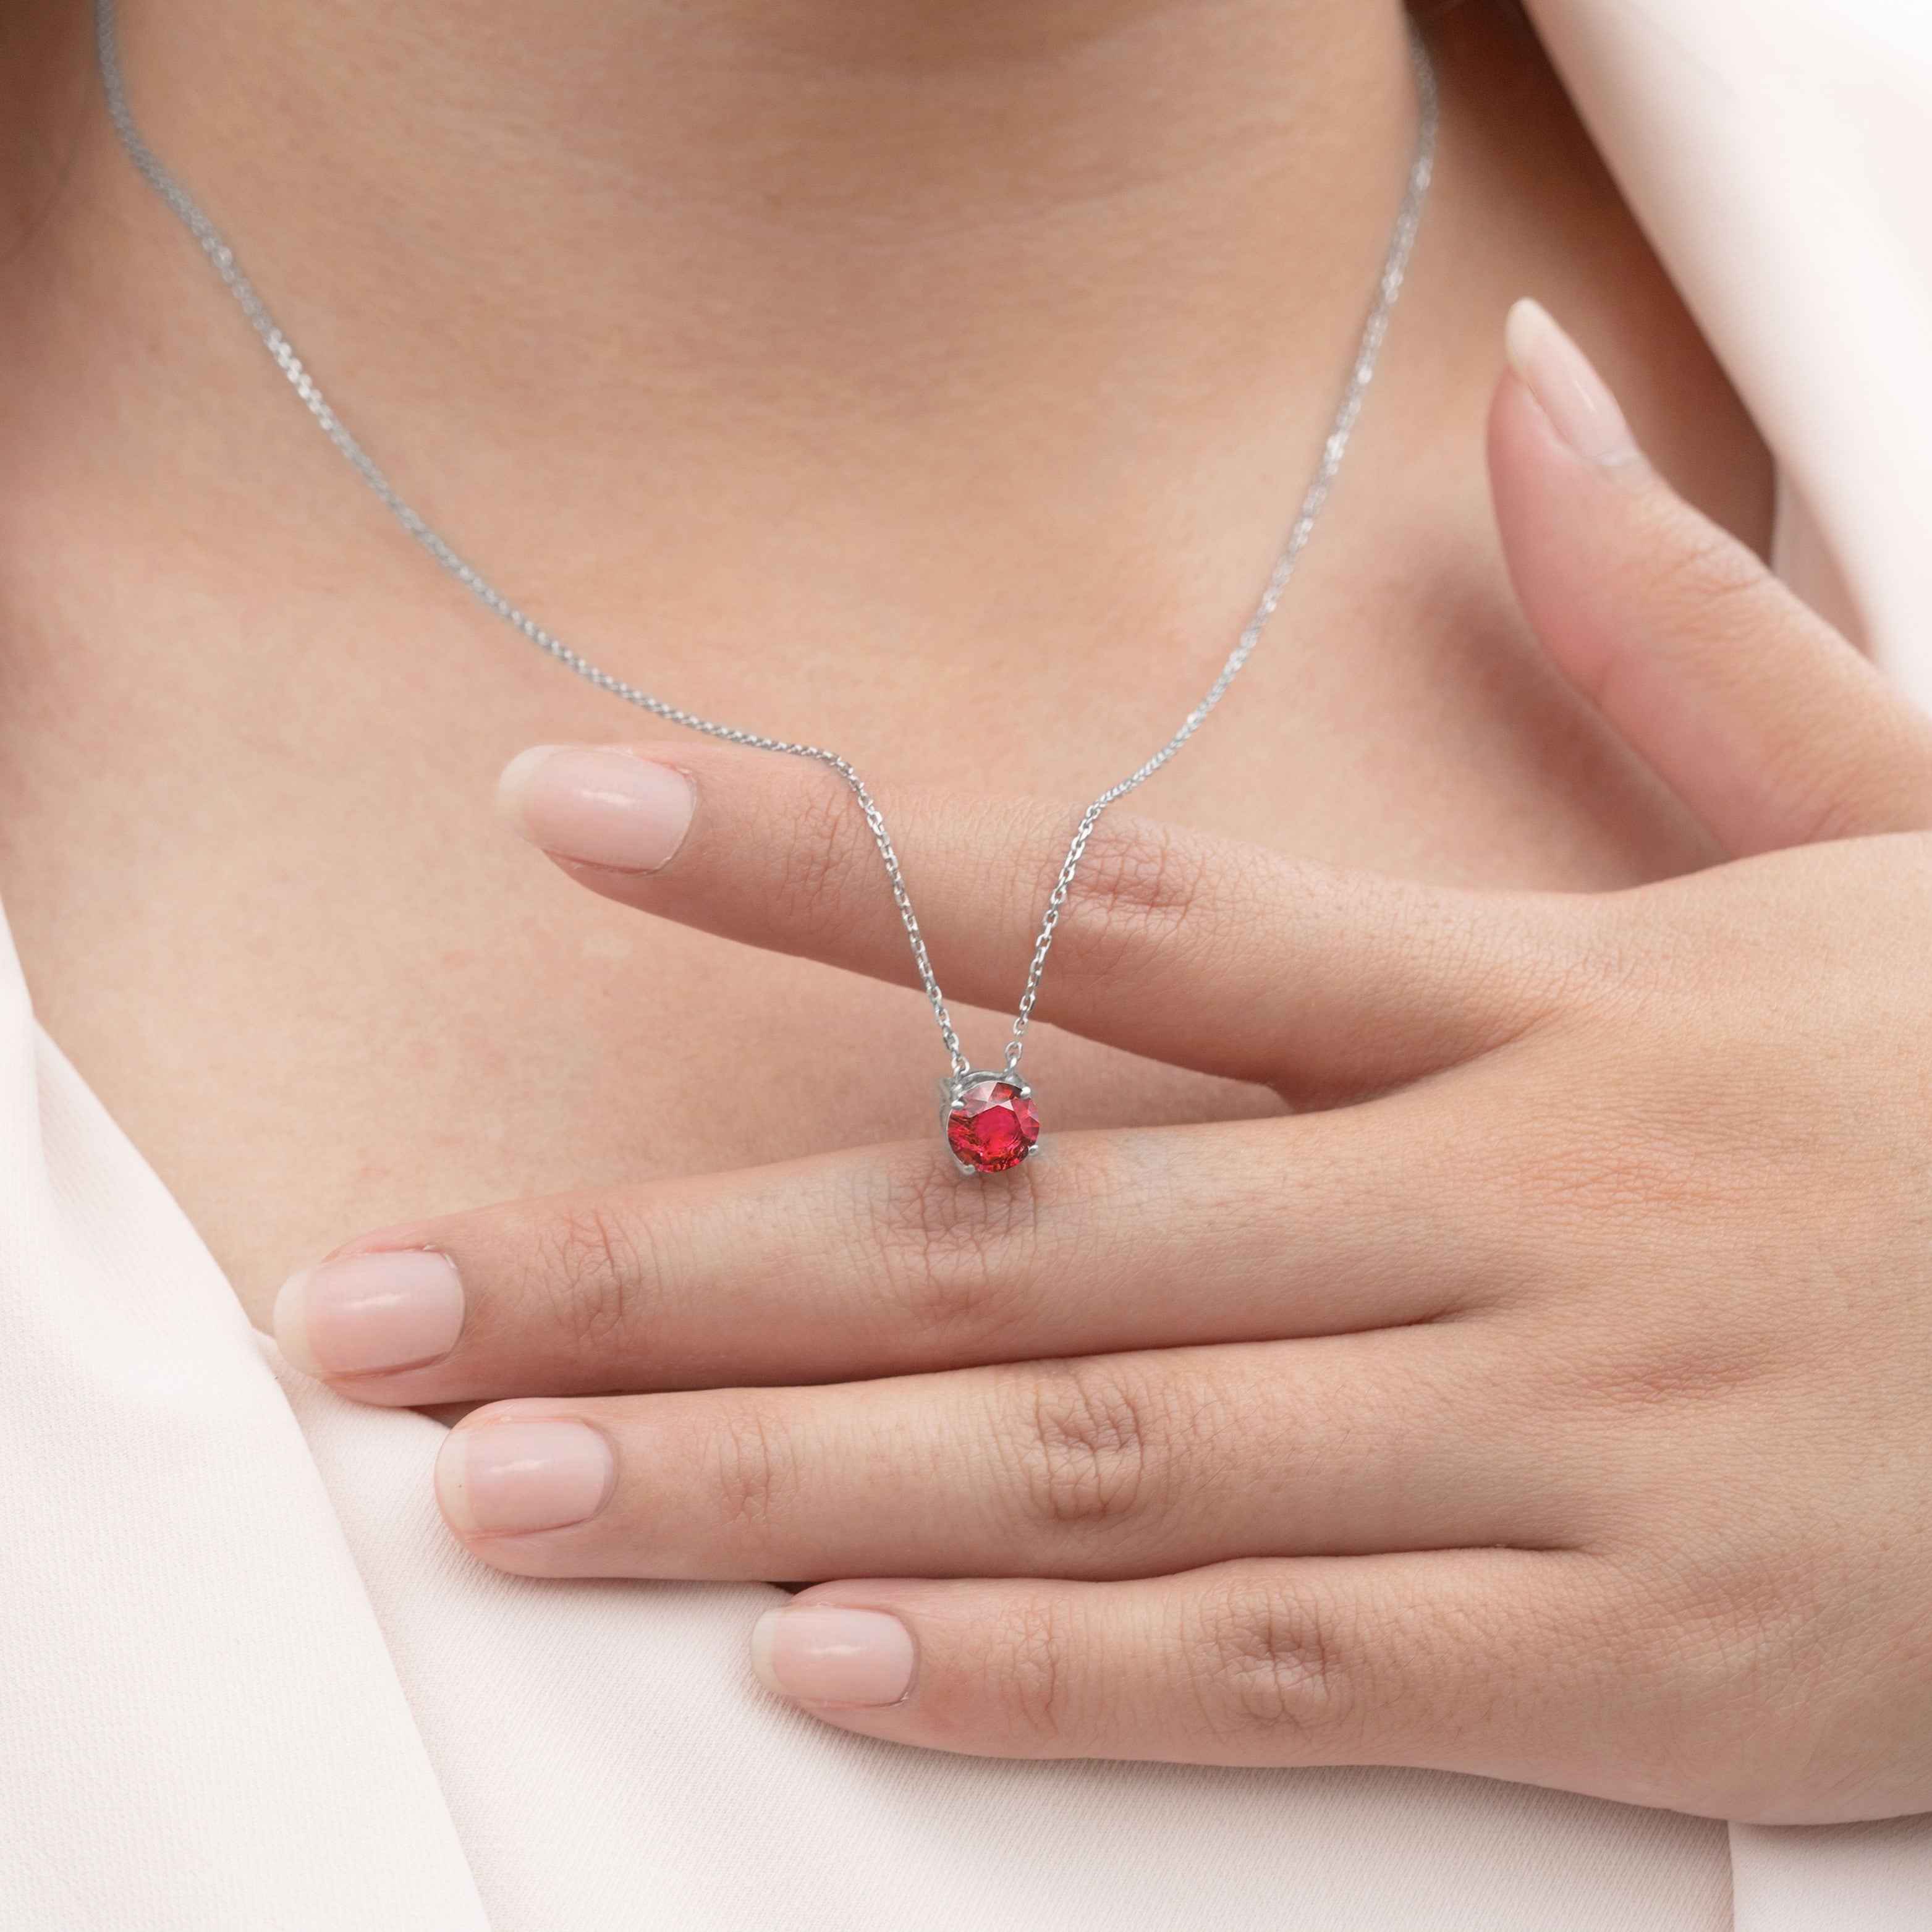 Stella Grace 10k White Gold Lab-Created Ruby Square Pendant Necklace